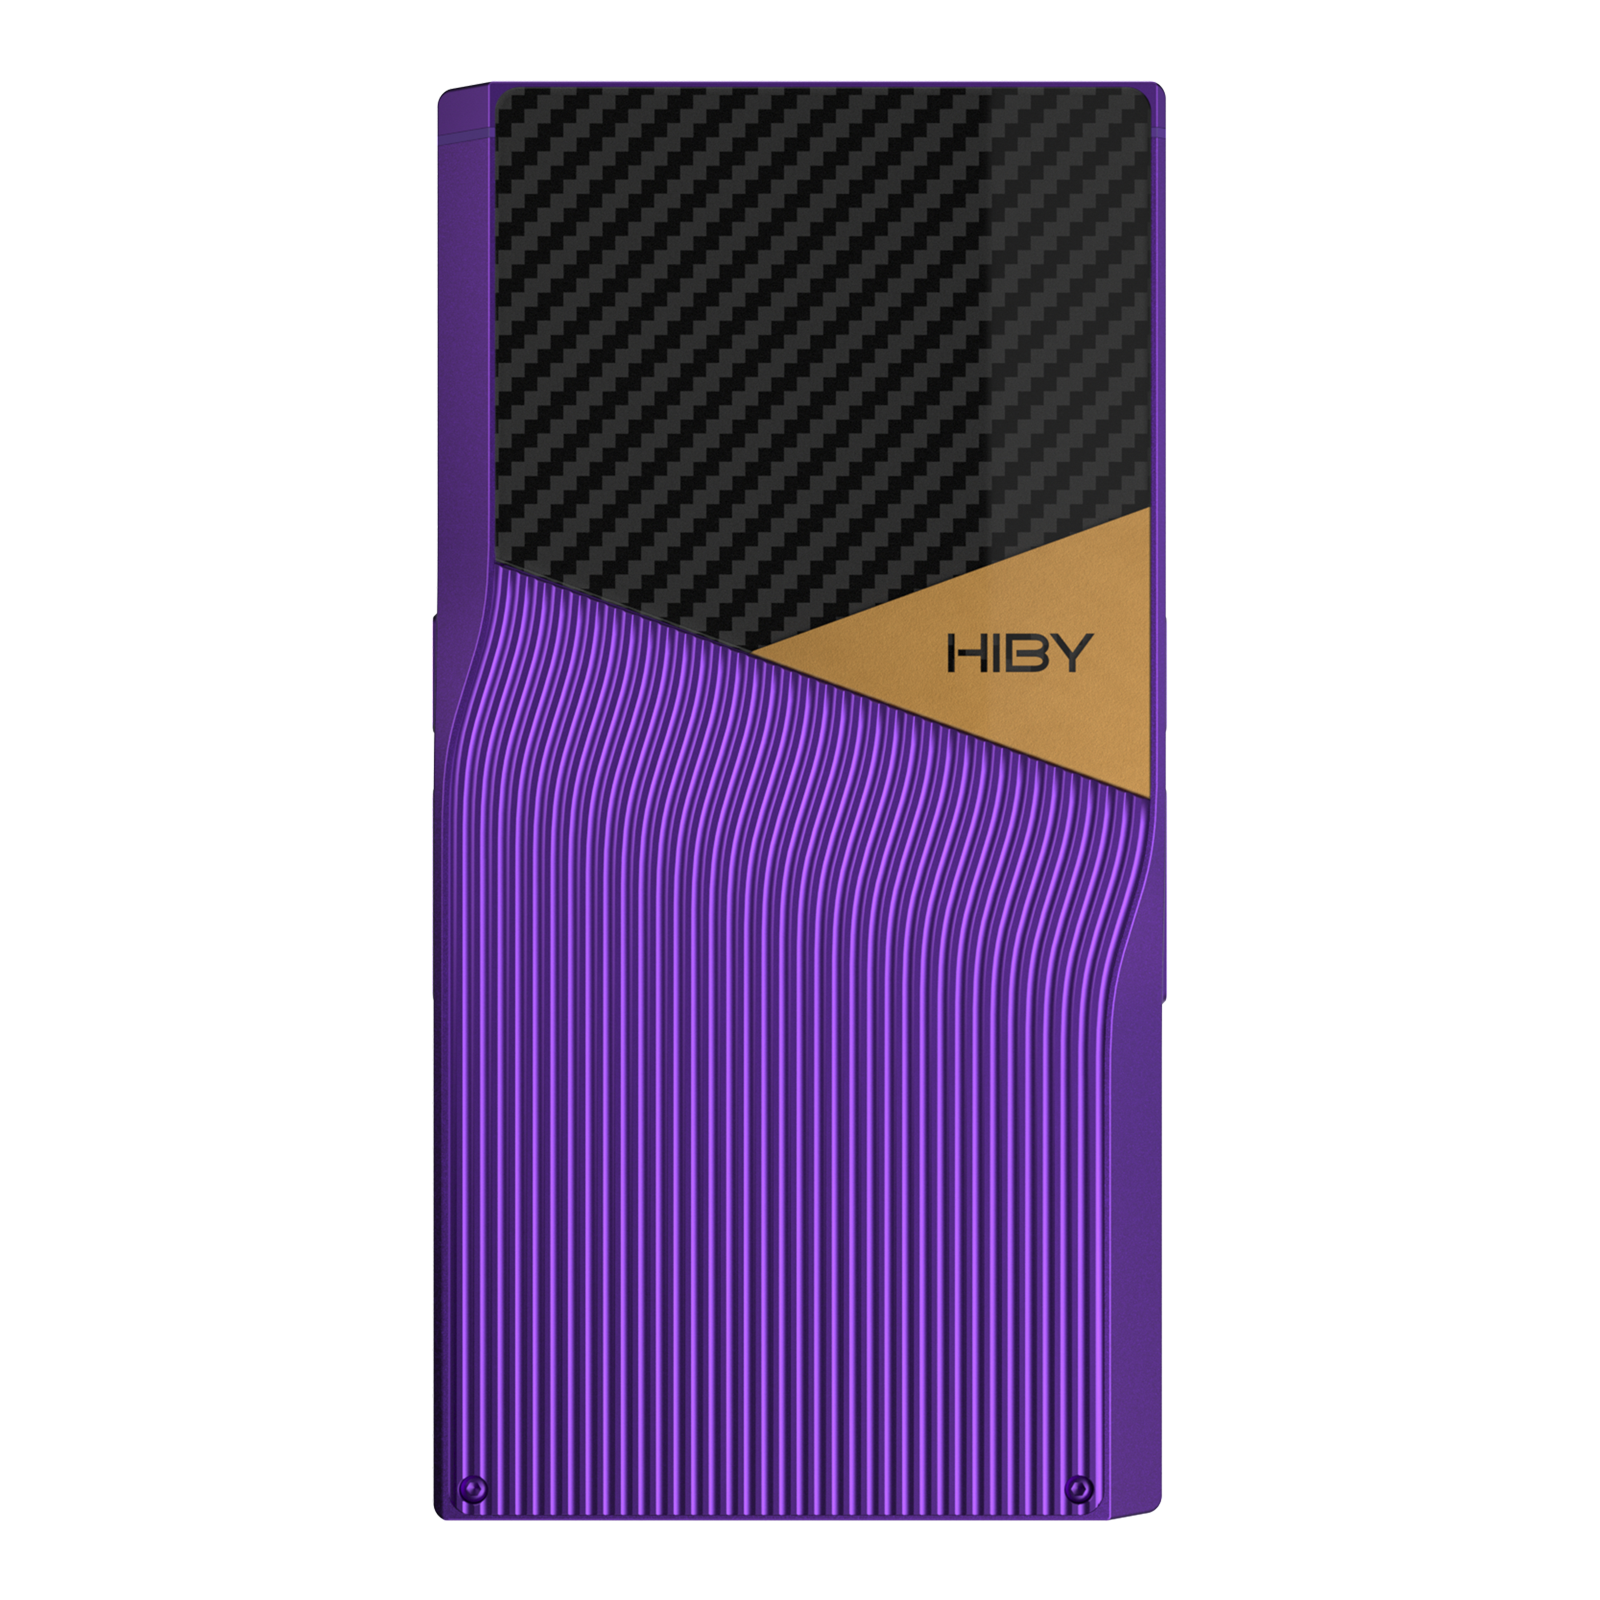 HiBy R6Pro II Lossless HD Music Player Hi-Res Portable DAP HiBy | Make Music More Musical 